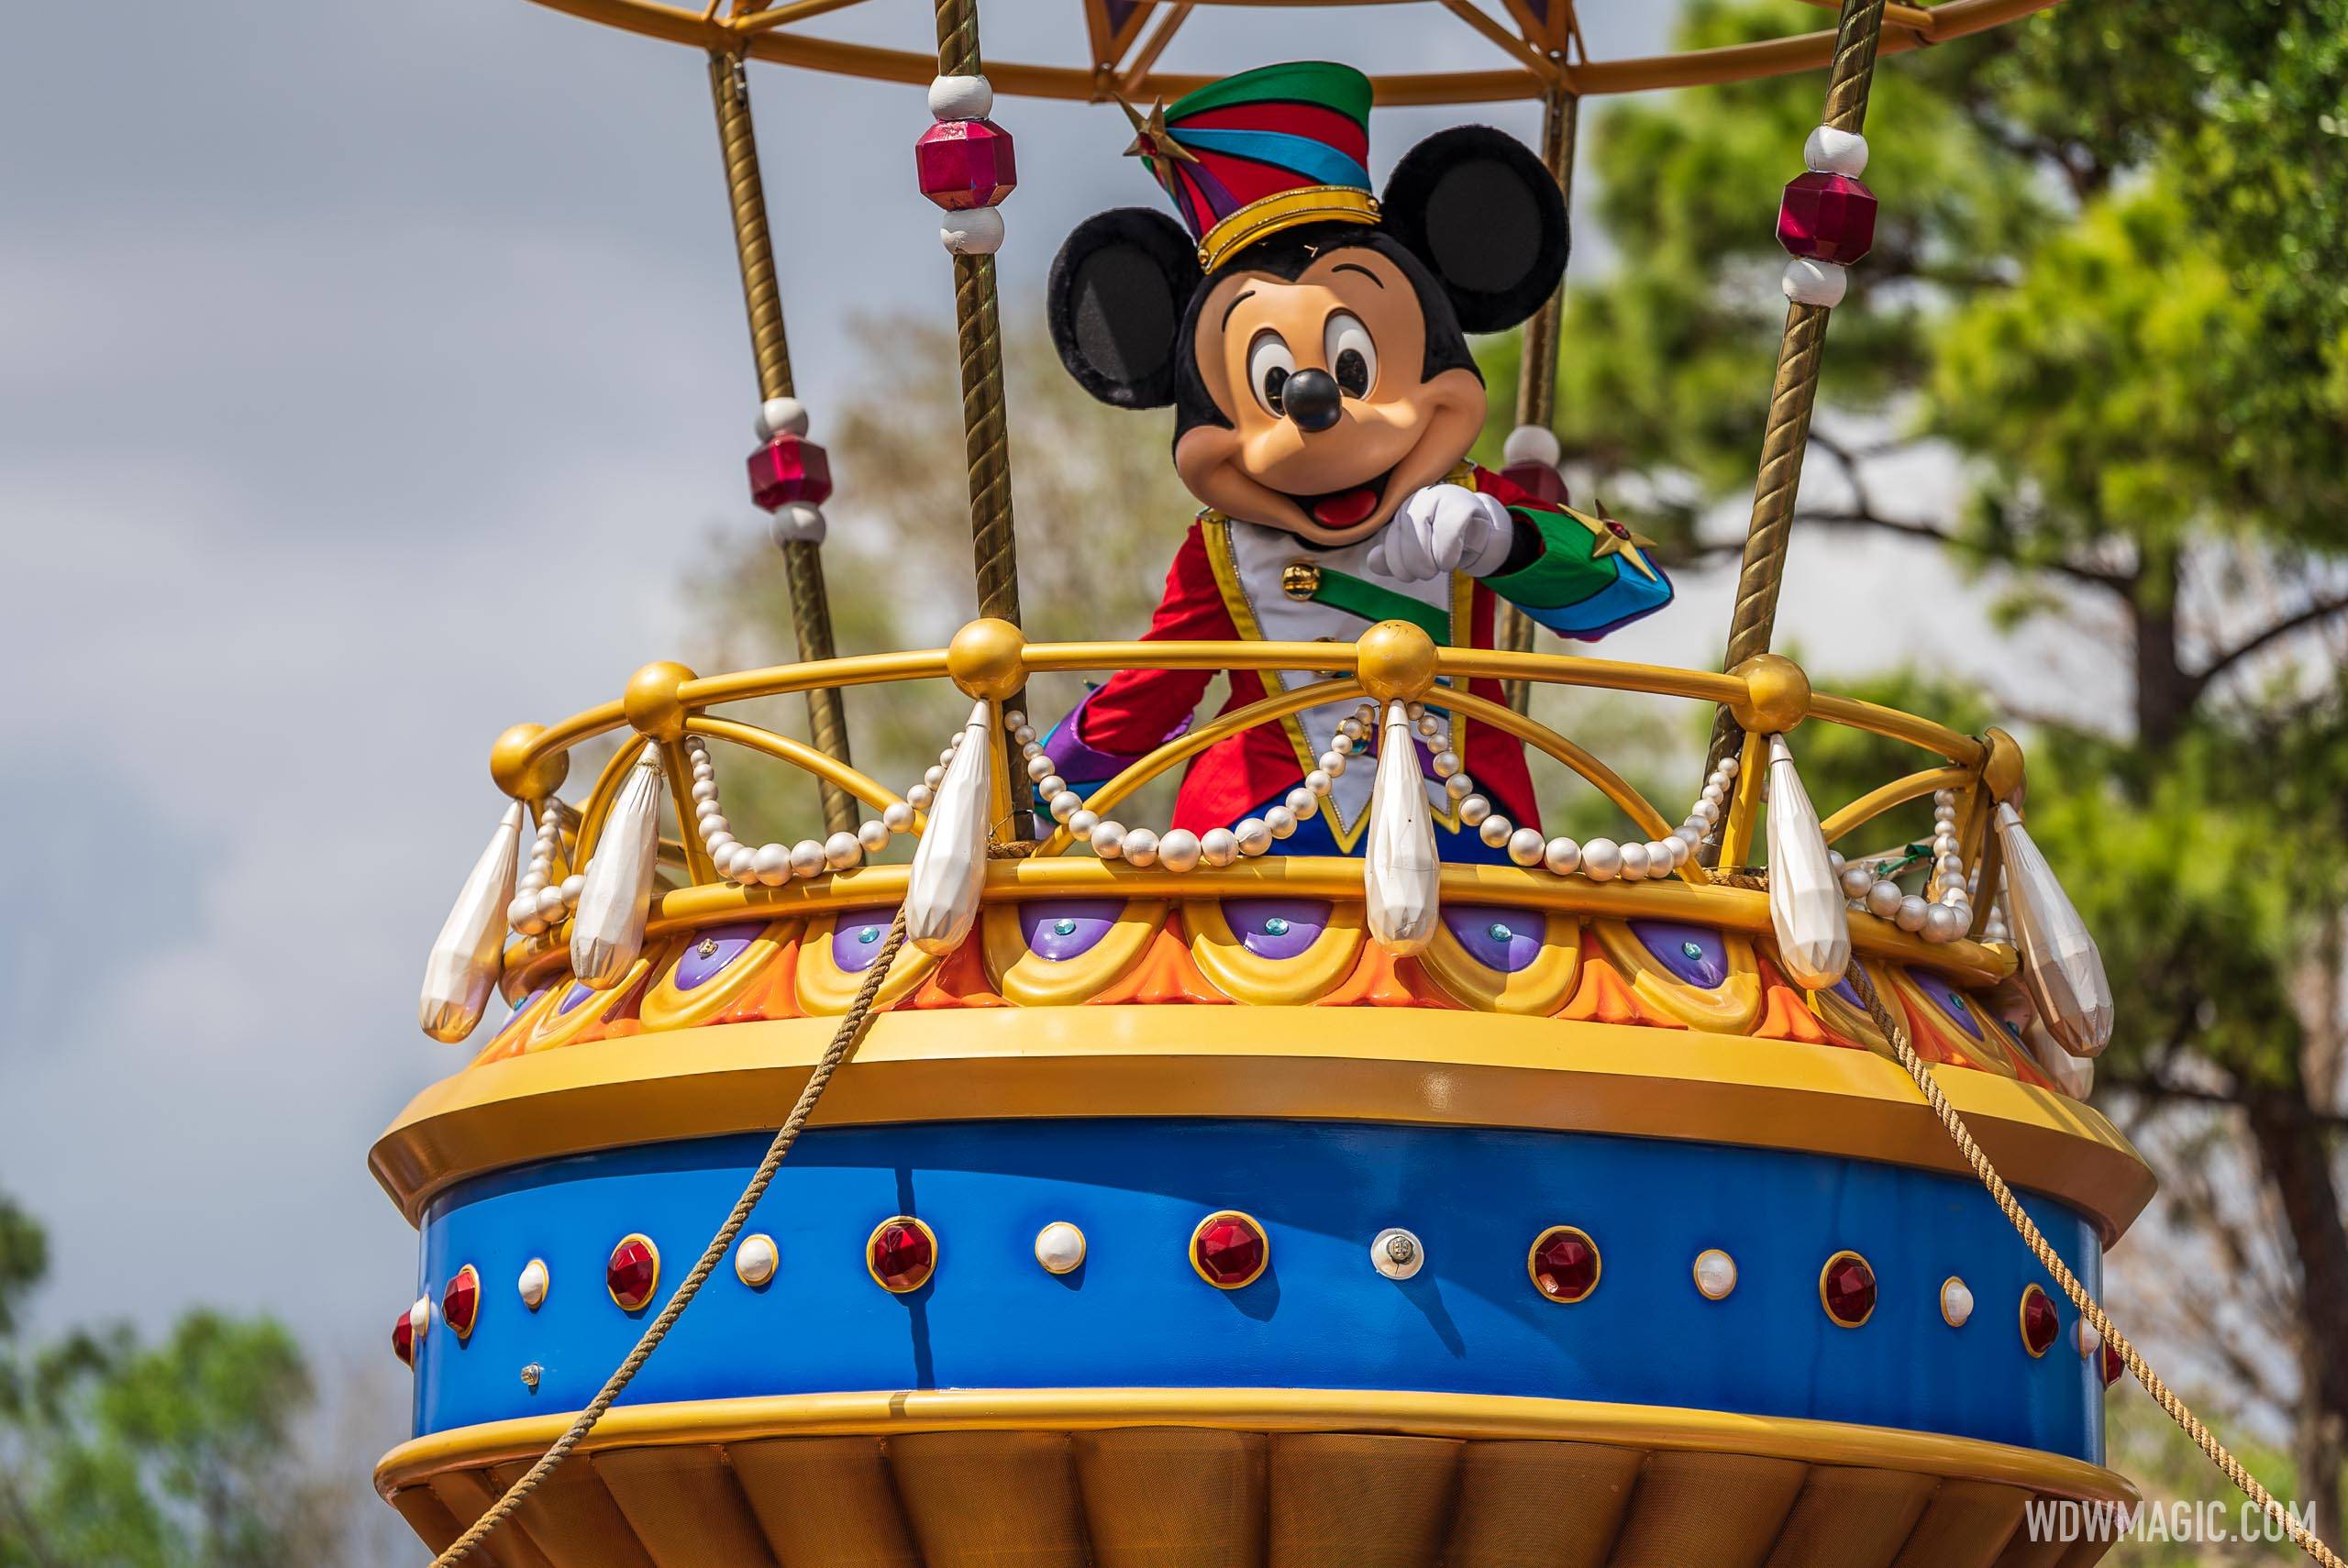 Most days in November and December will see Festival of Fantasy Parade performed at 12 pm and 3pm